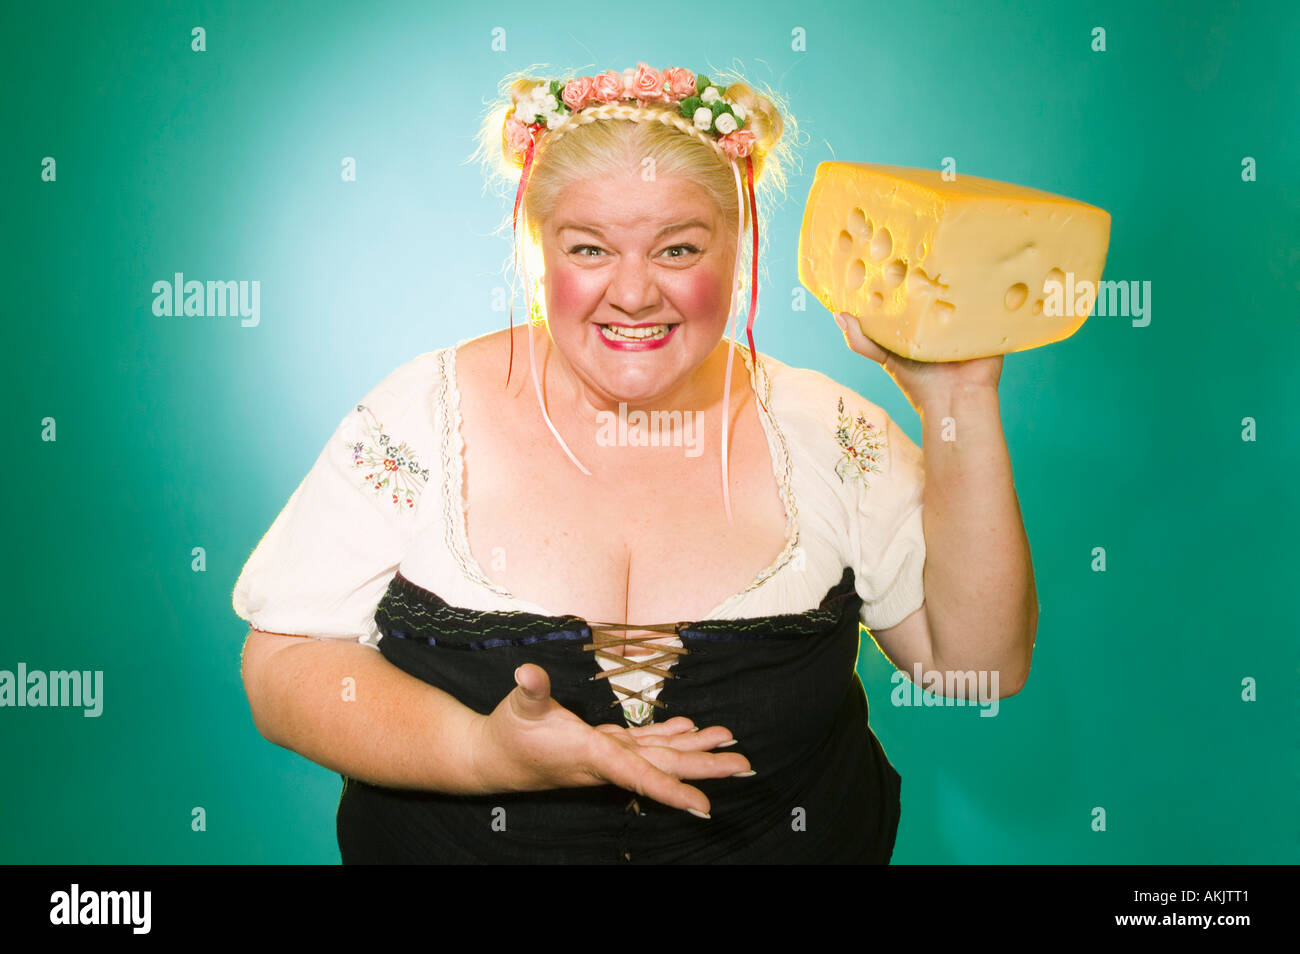 Woman in Germanic costume with cheese wedge Stock Photo